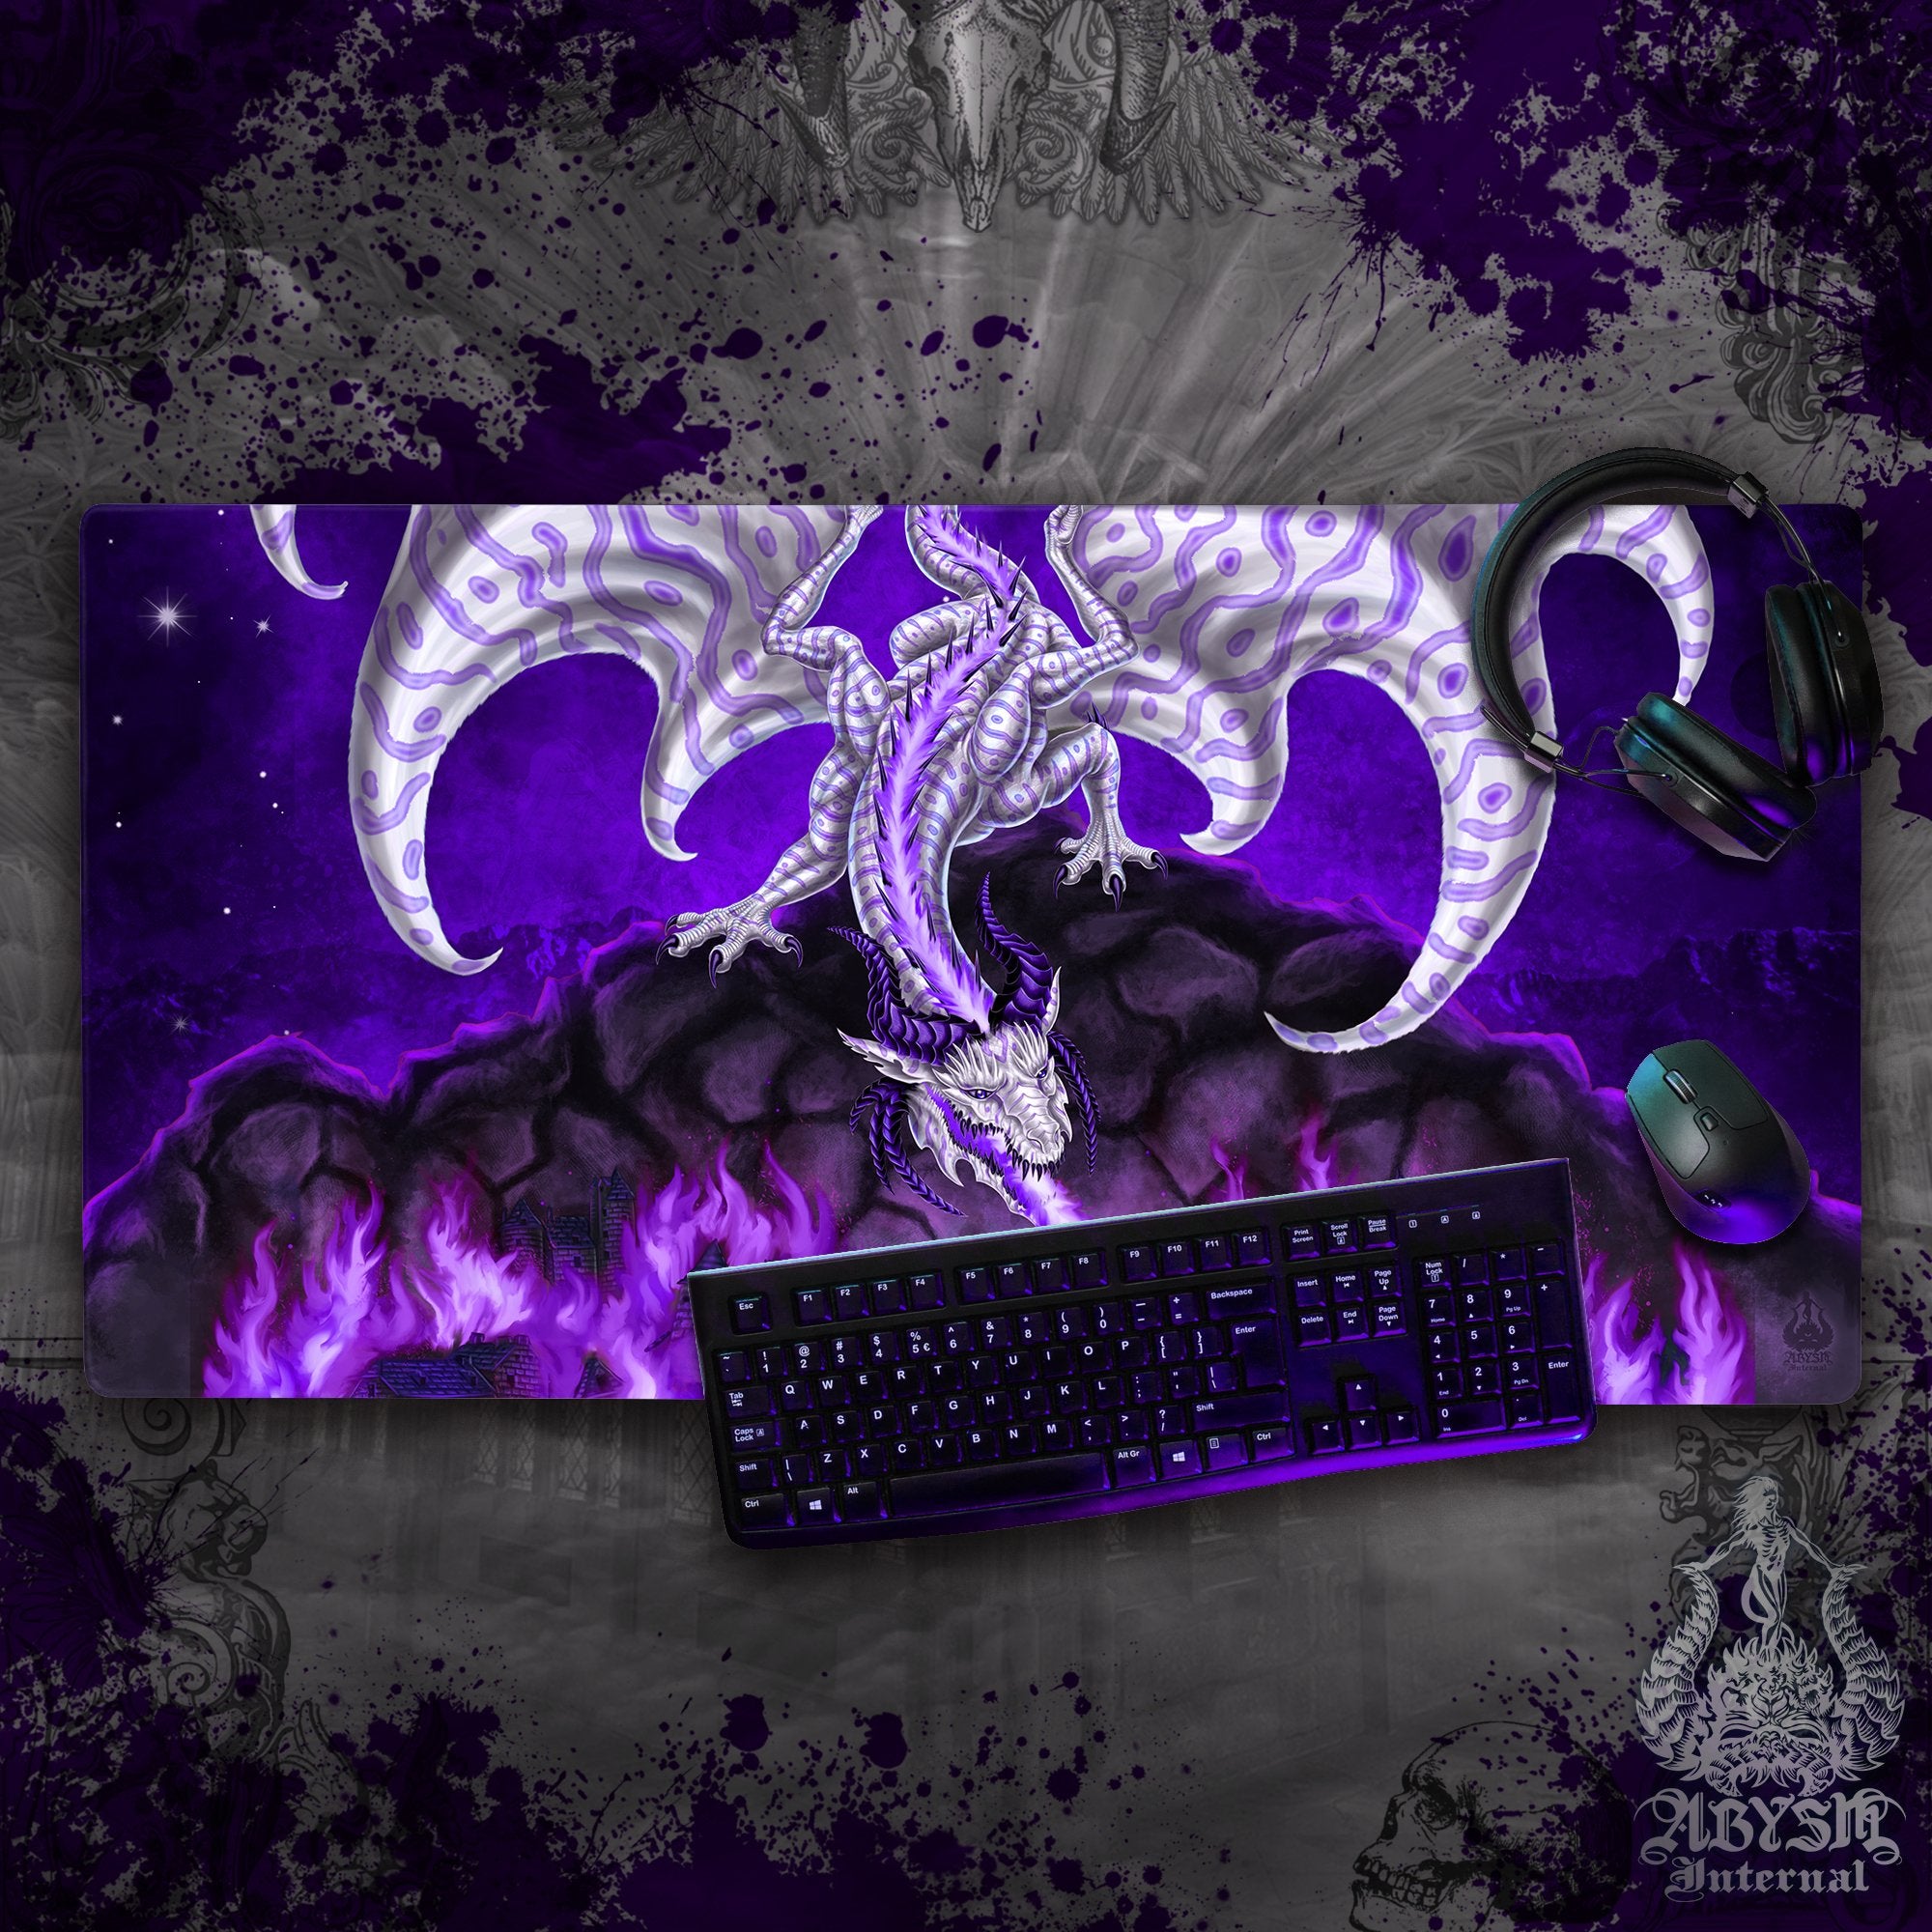 Dragon Desk Mat, Fantasy Art Gaming Mouse Pad, White Goth Purple Table Protector Cover, RPG Workpad, DM Gift Print - Fire - Abysm Internal